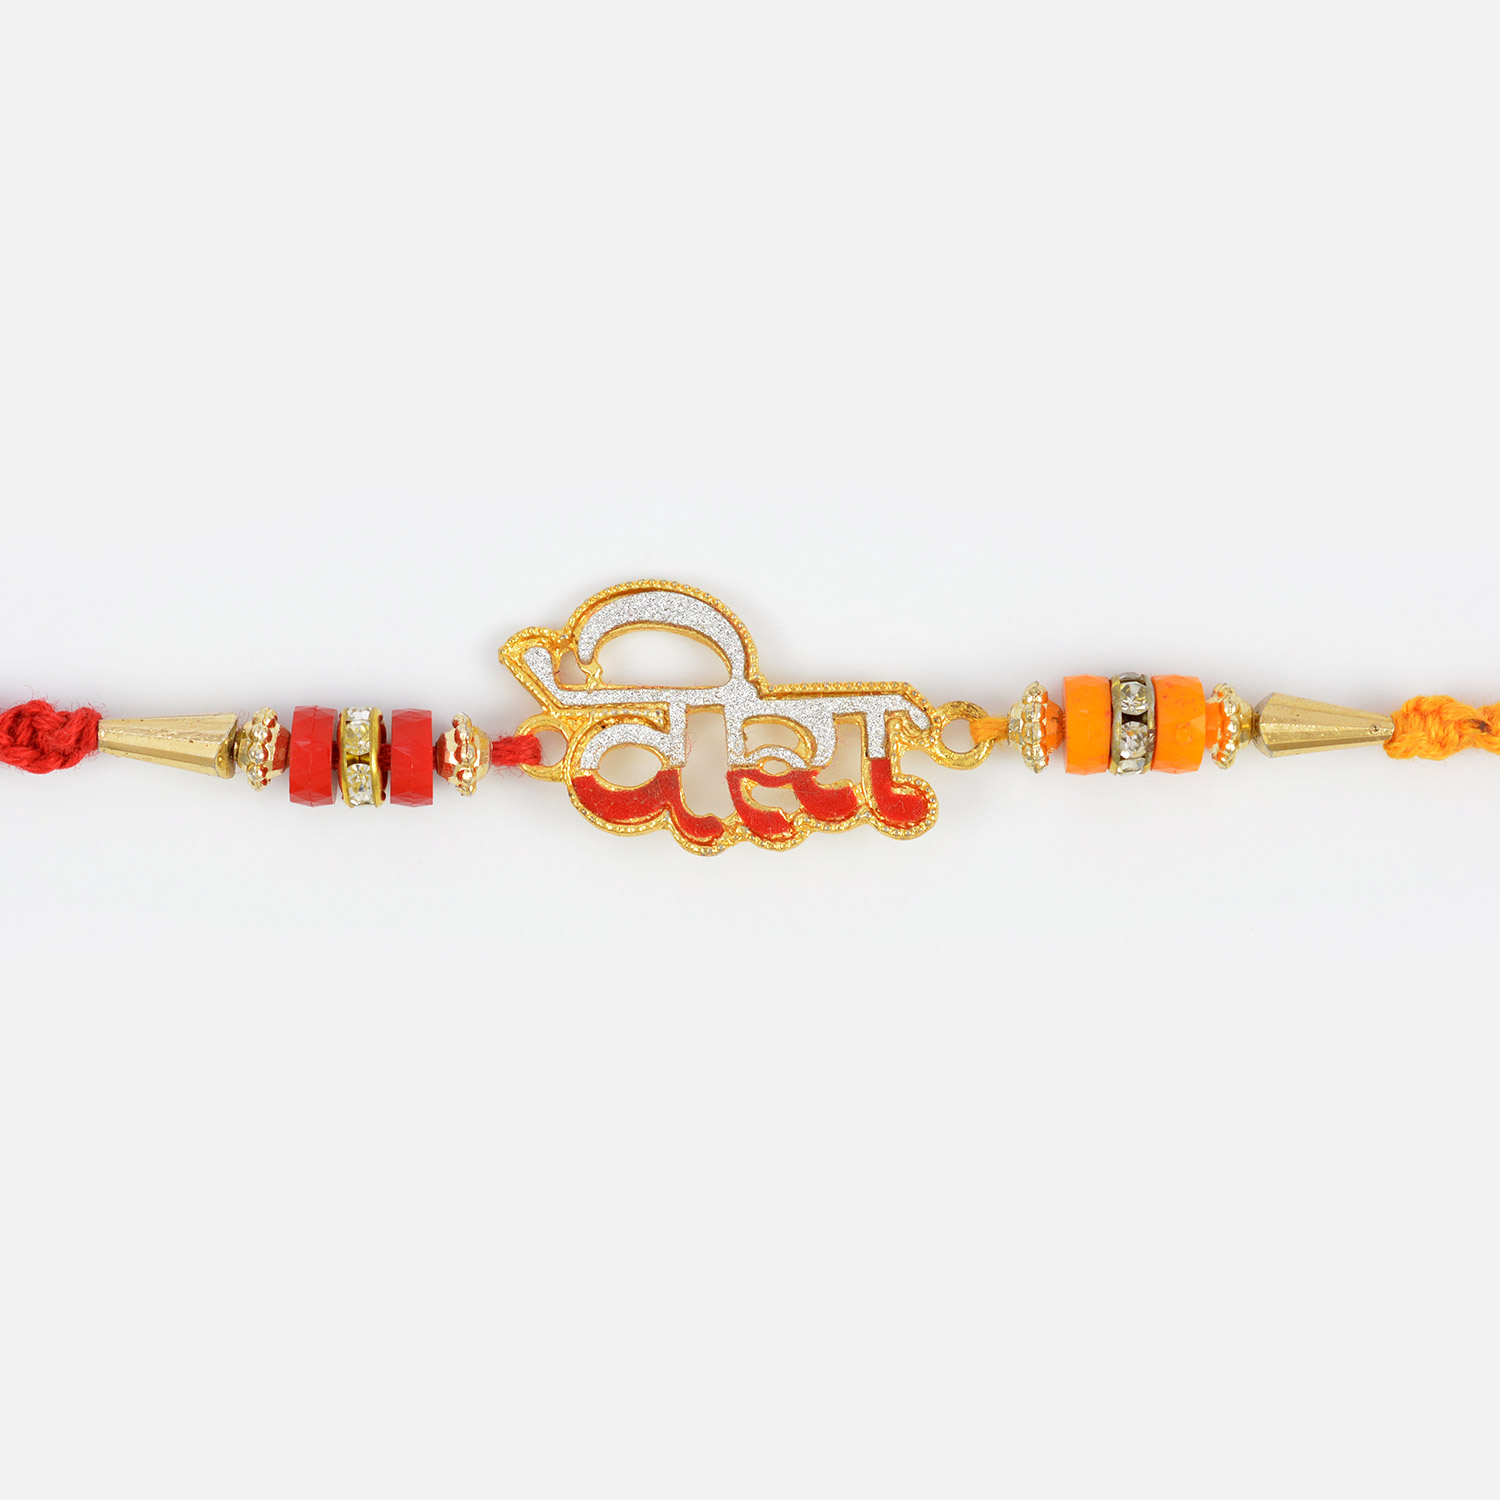 Red and Silver Color Veera Rakhi with beads